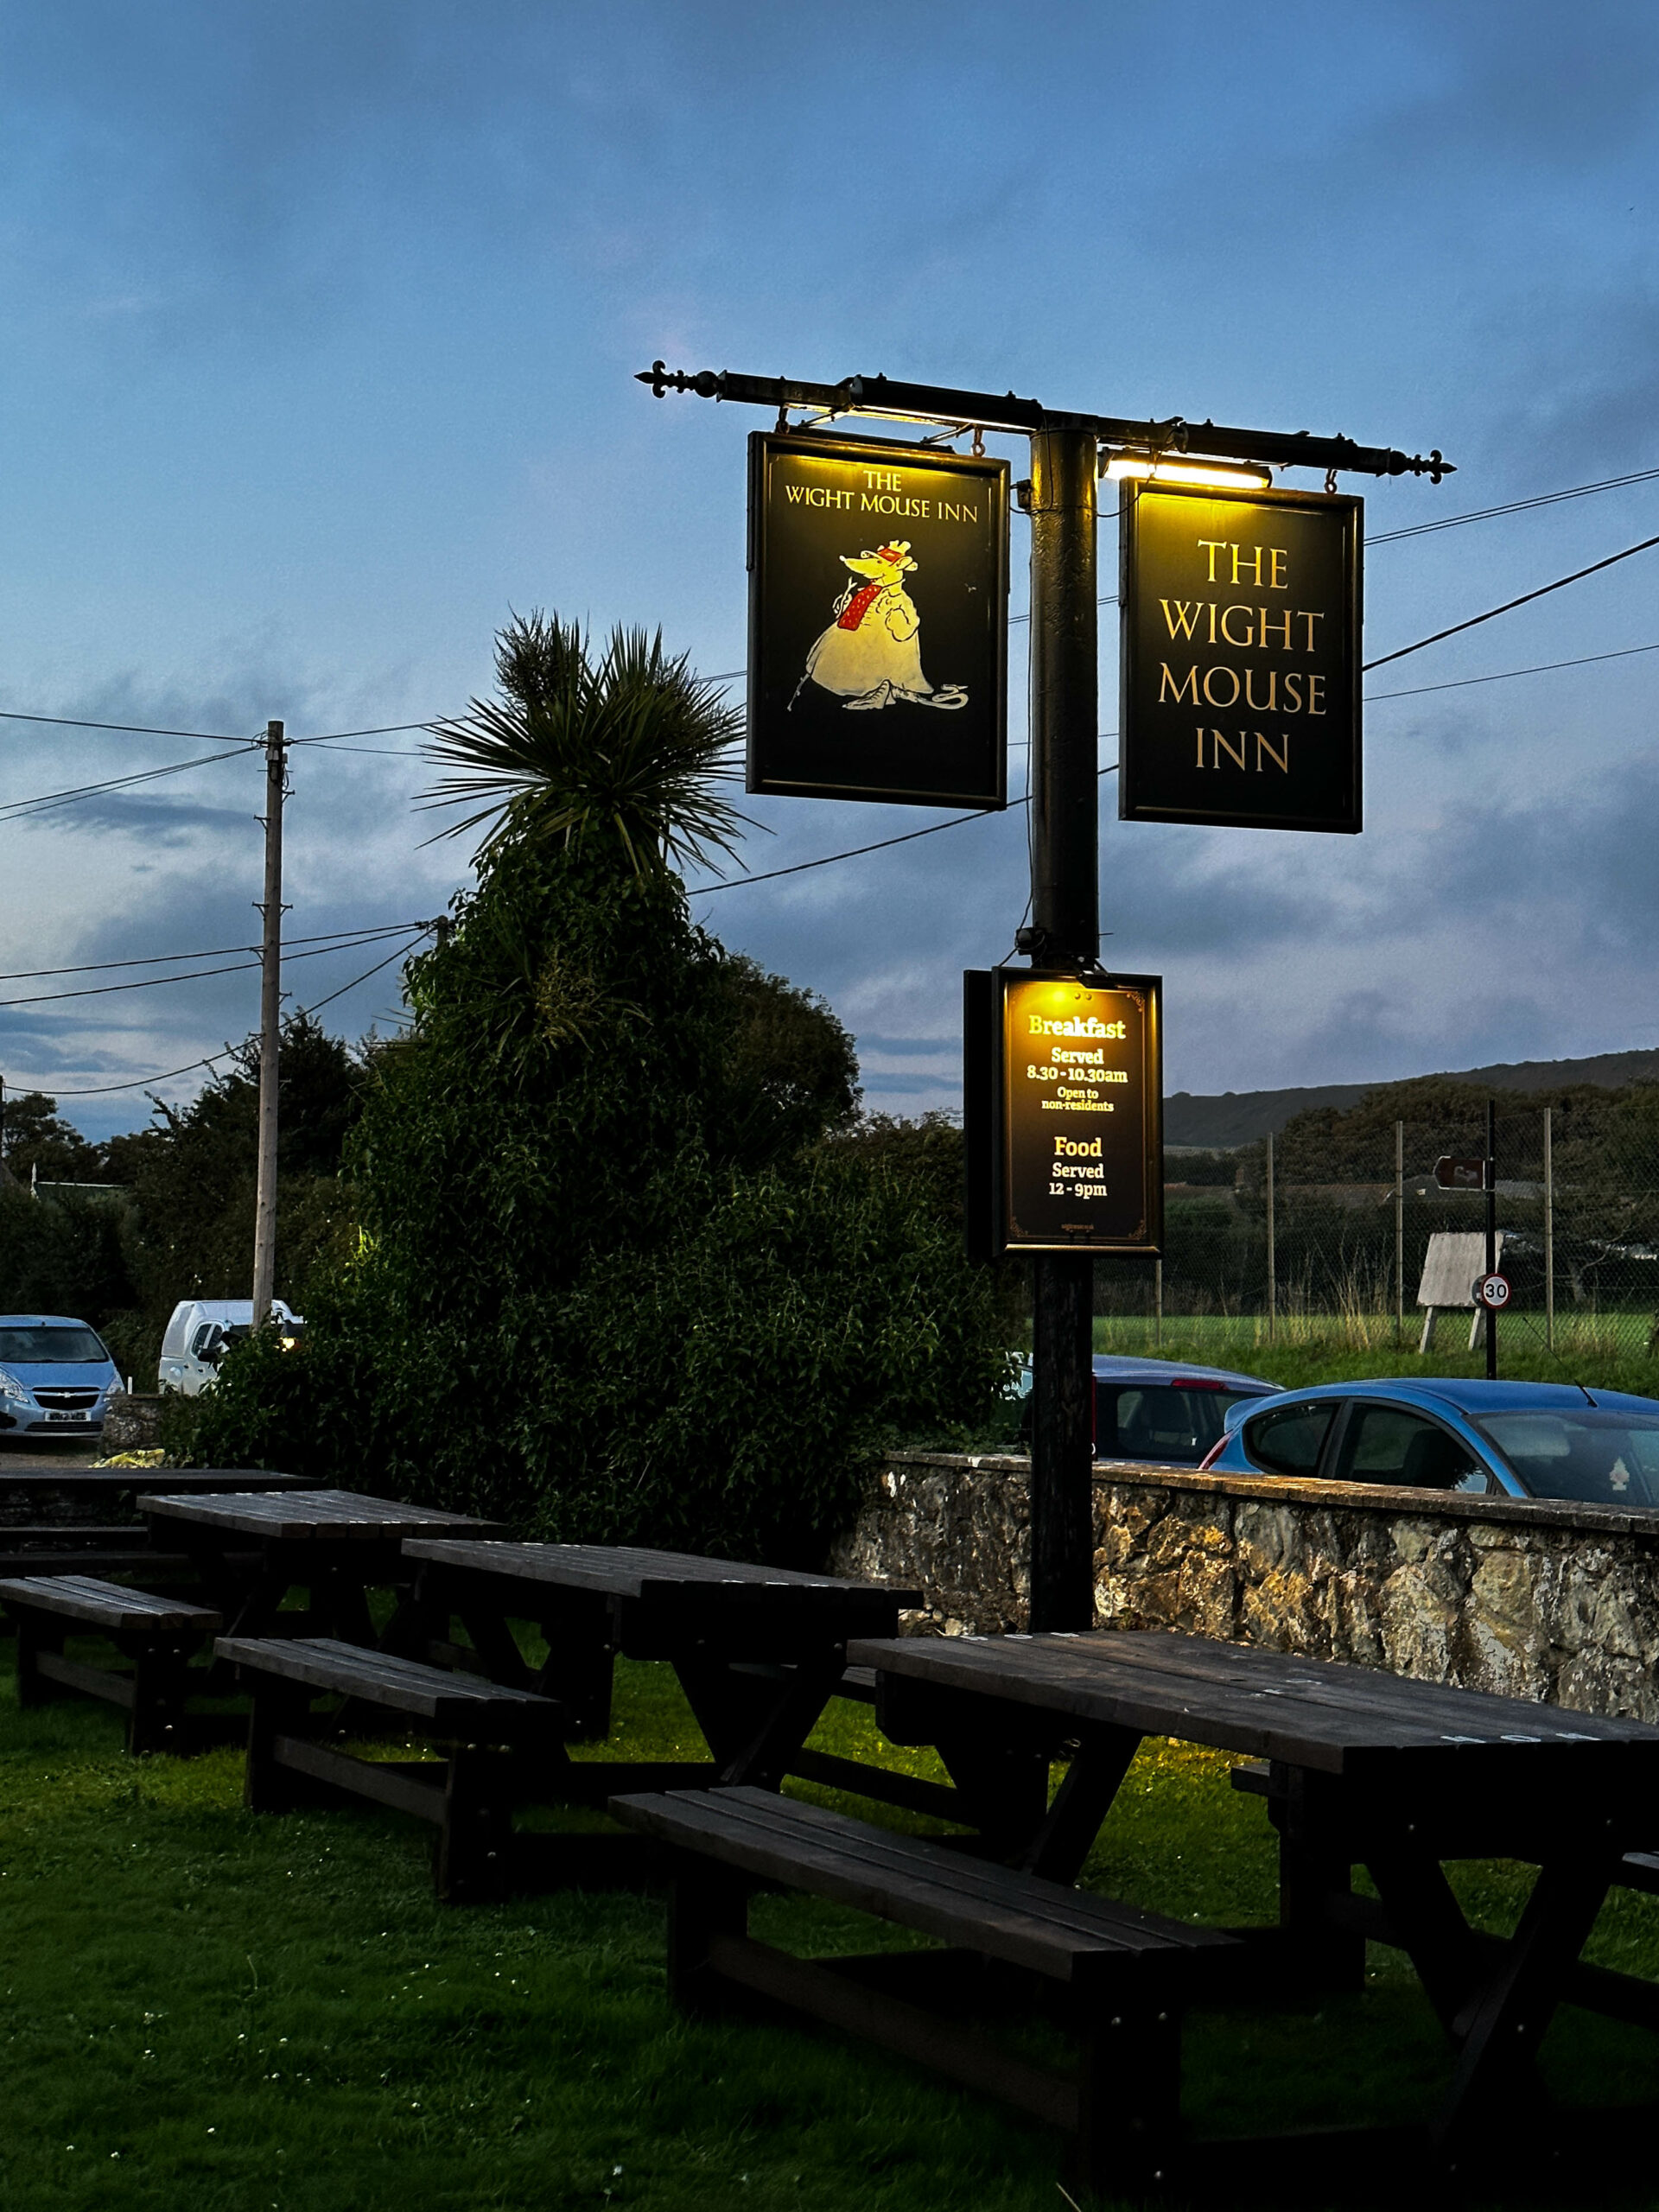 The Wight Mouse Inn is a fantastic pub and hotel on the Isle of Wight.